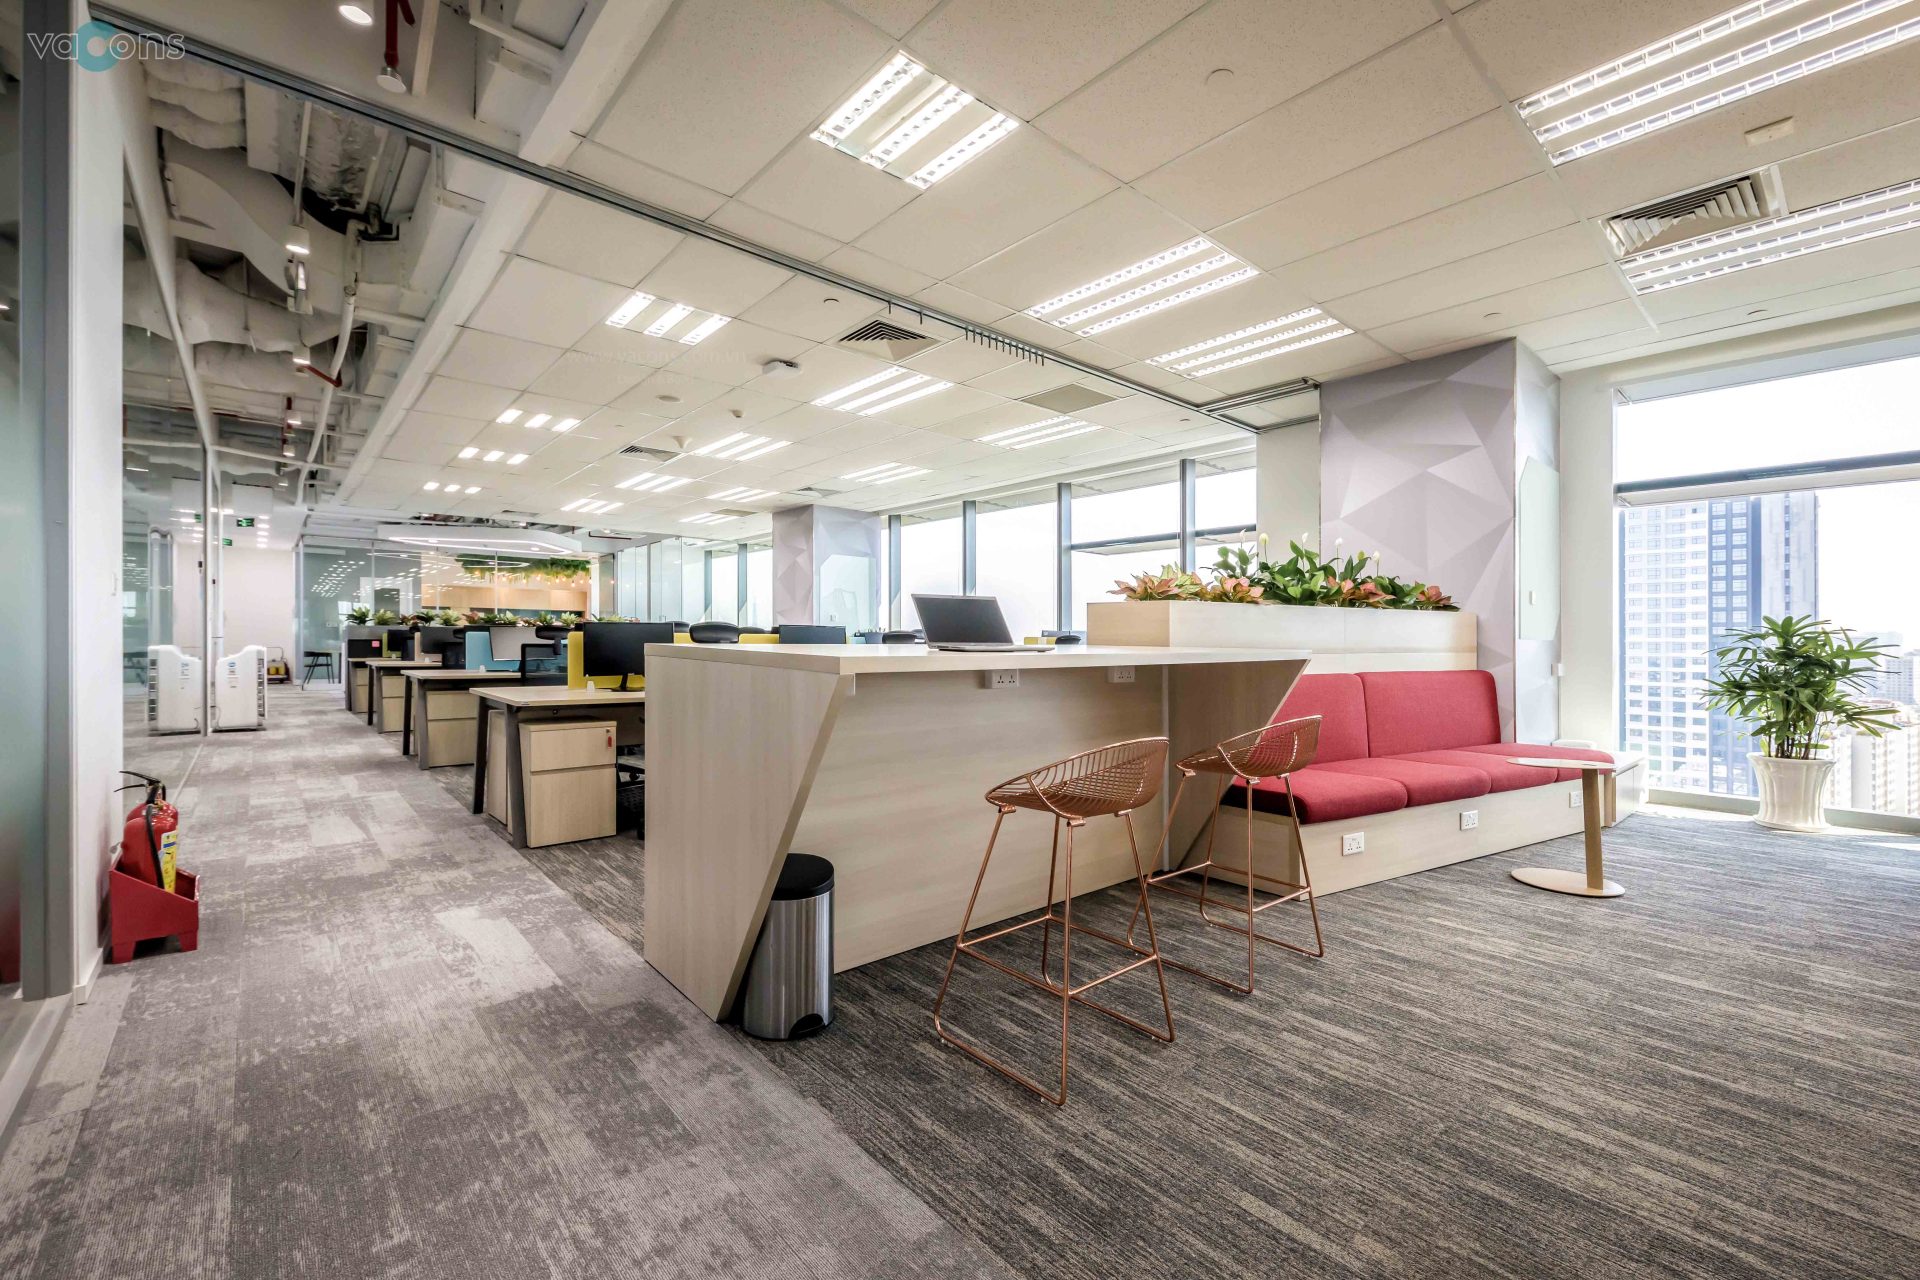 Designing and Building an Office Space: Tips and Tricks for Optimal Decor, Architecture, and Construction